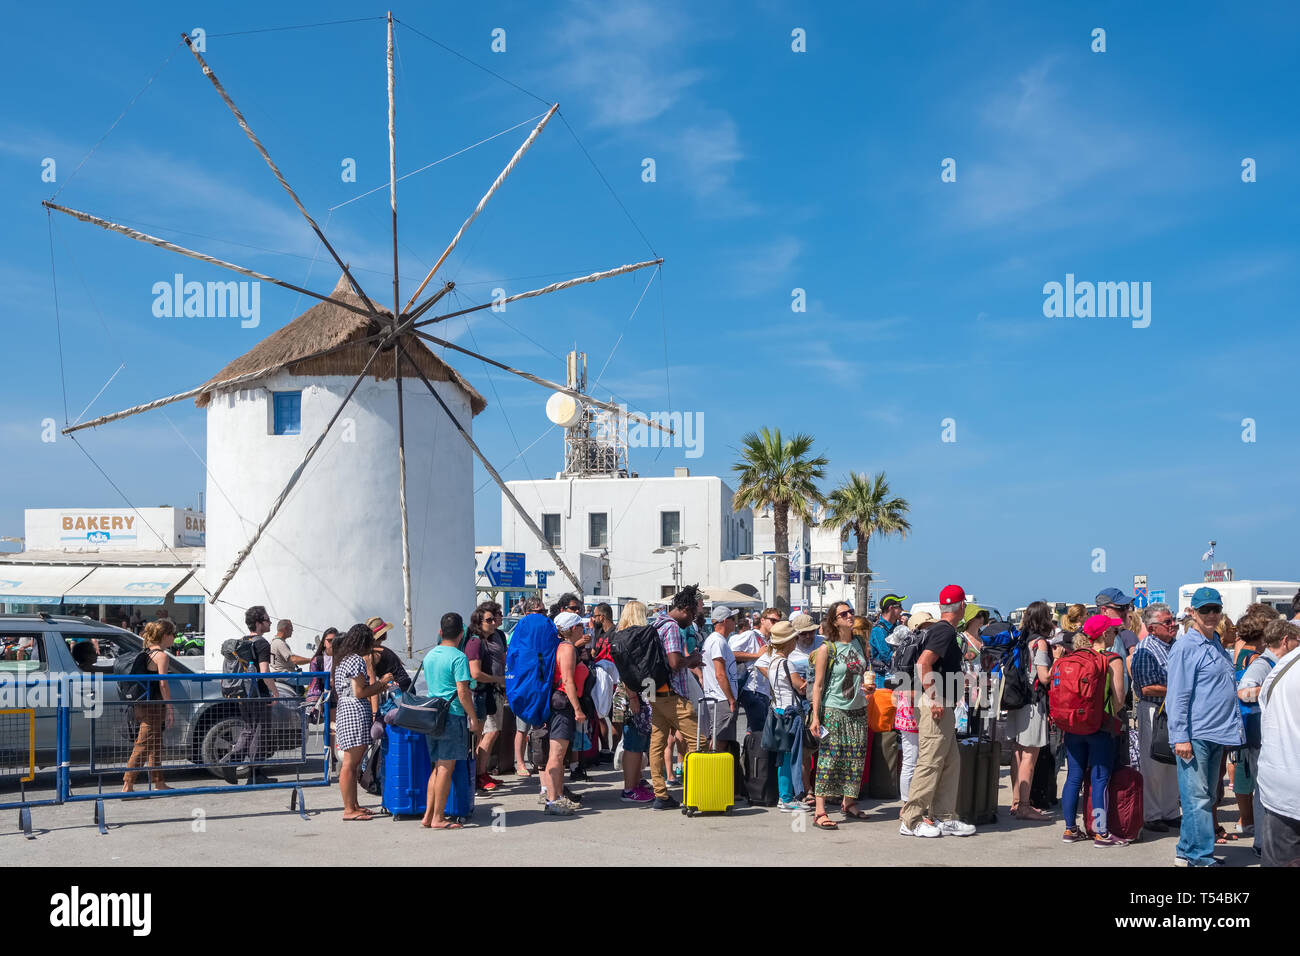 Paros, Greece - June 5, 2018: Unidentified tourists waiting in line to ferry boat with a Traditional cycladic windmill at background on Paros island,  Stock Photo